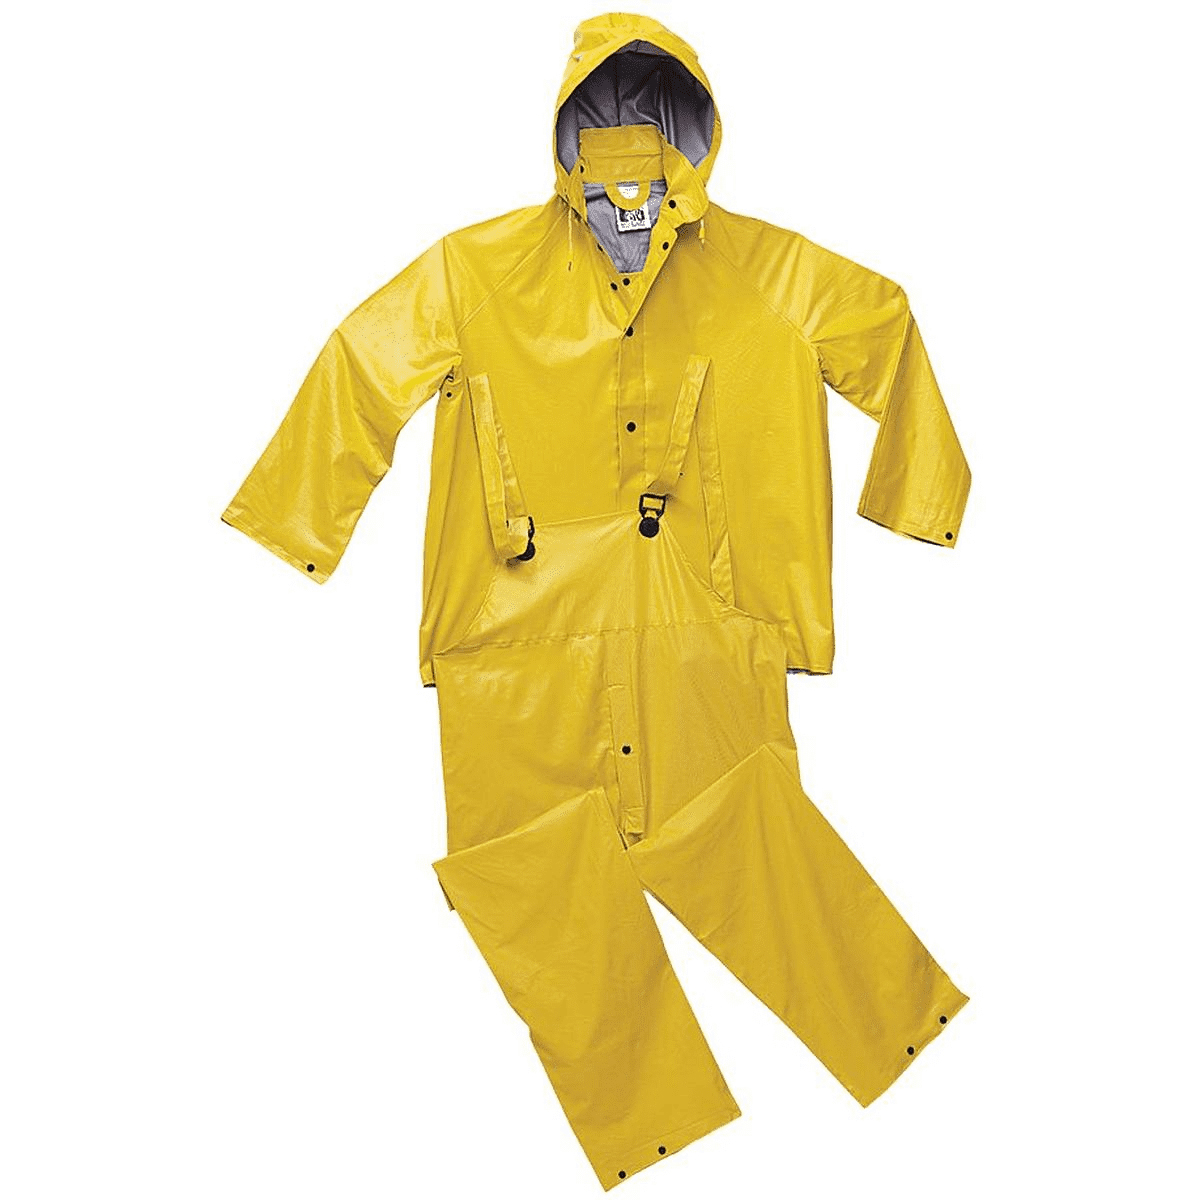 Tuff-Enuff 3-pc Suit in Gold Size 3X-Large